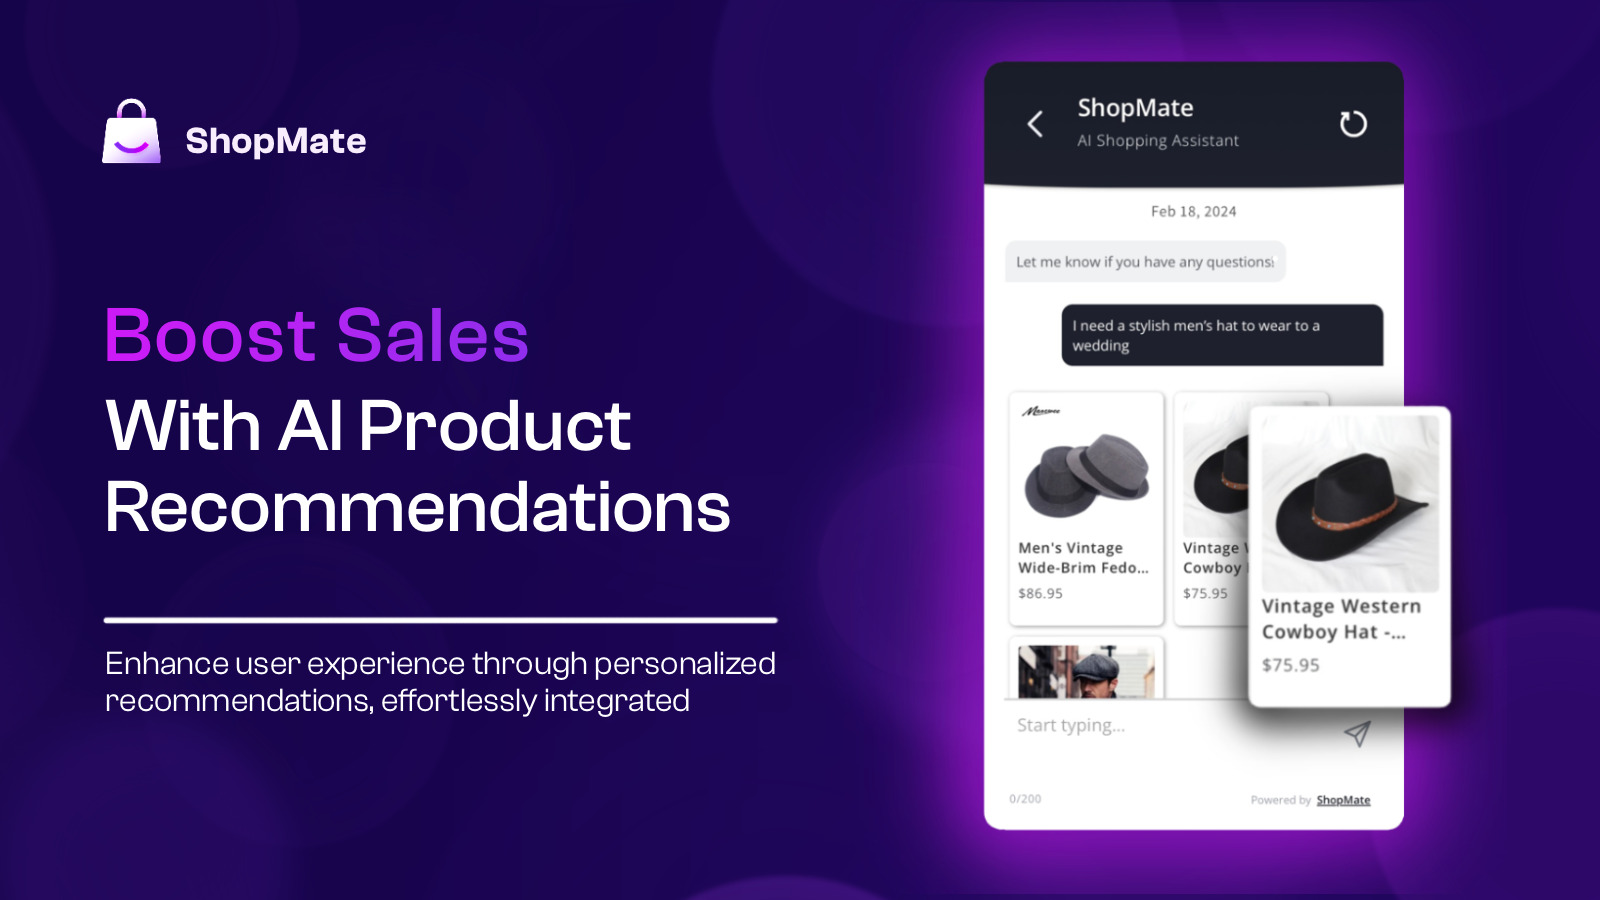 App feature - Boost sales with AI product recommendations